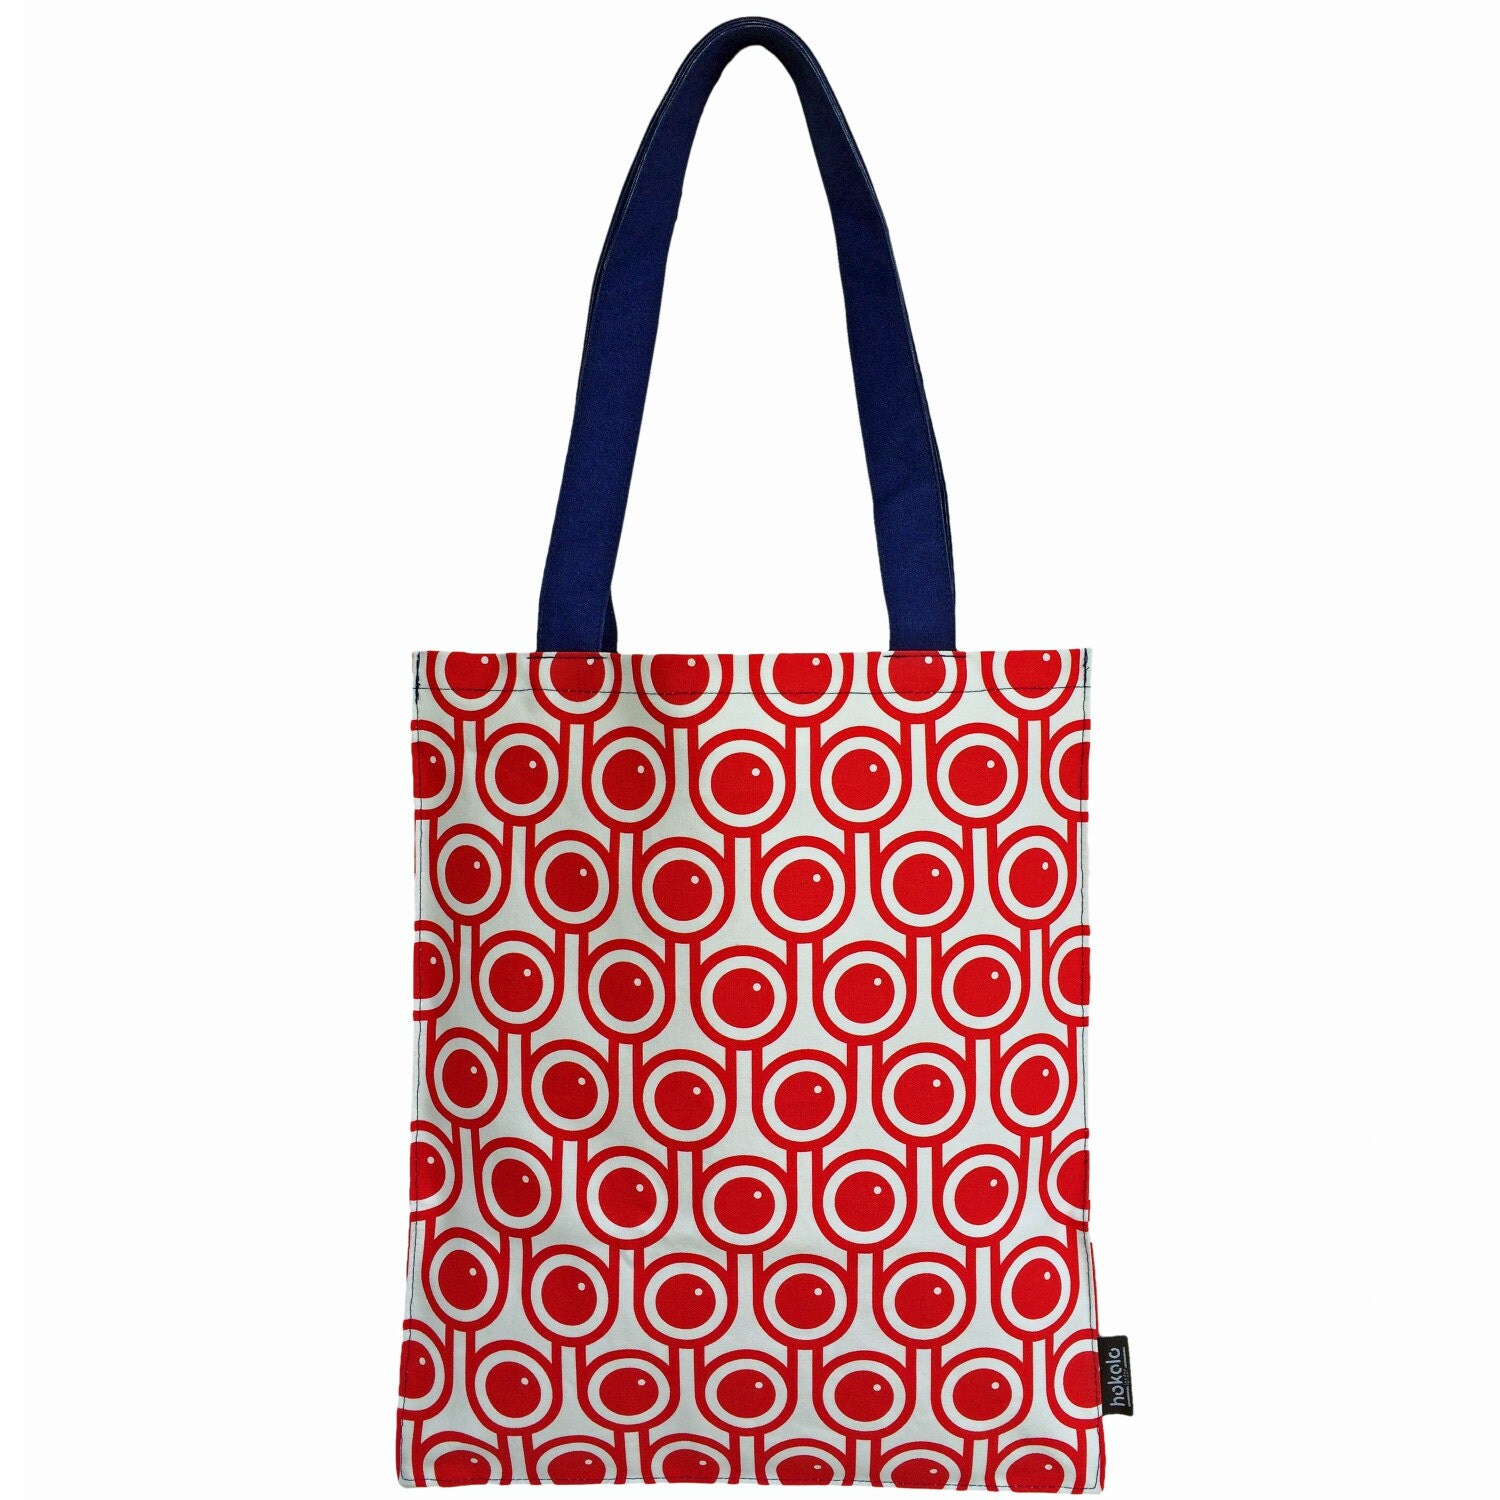 50% off Screen printed cotton canvas tote bags